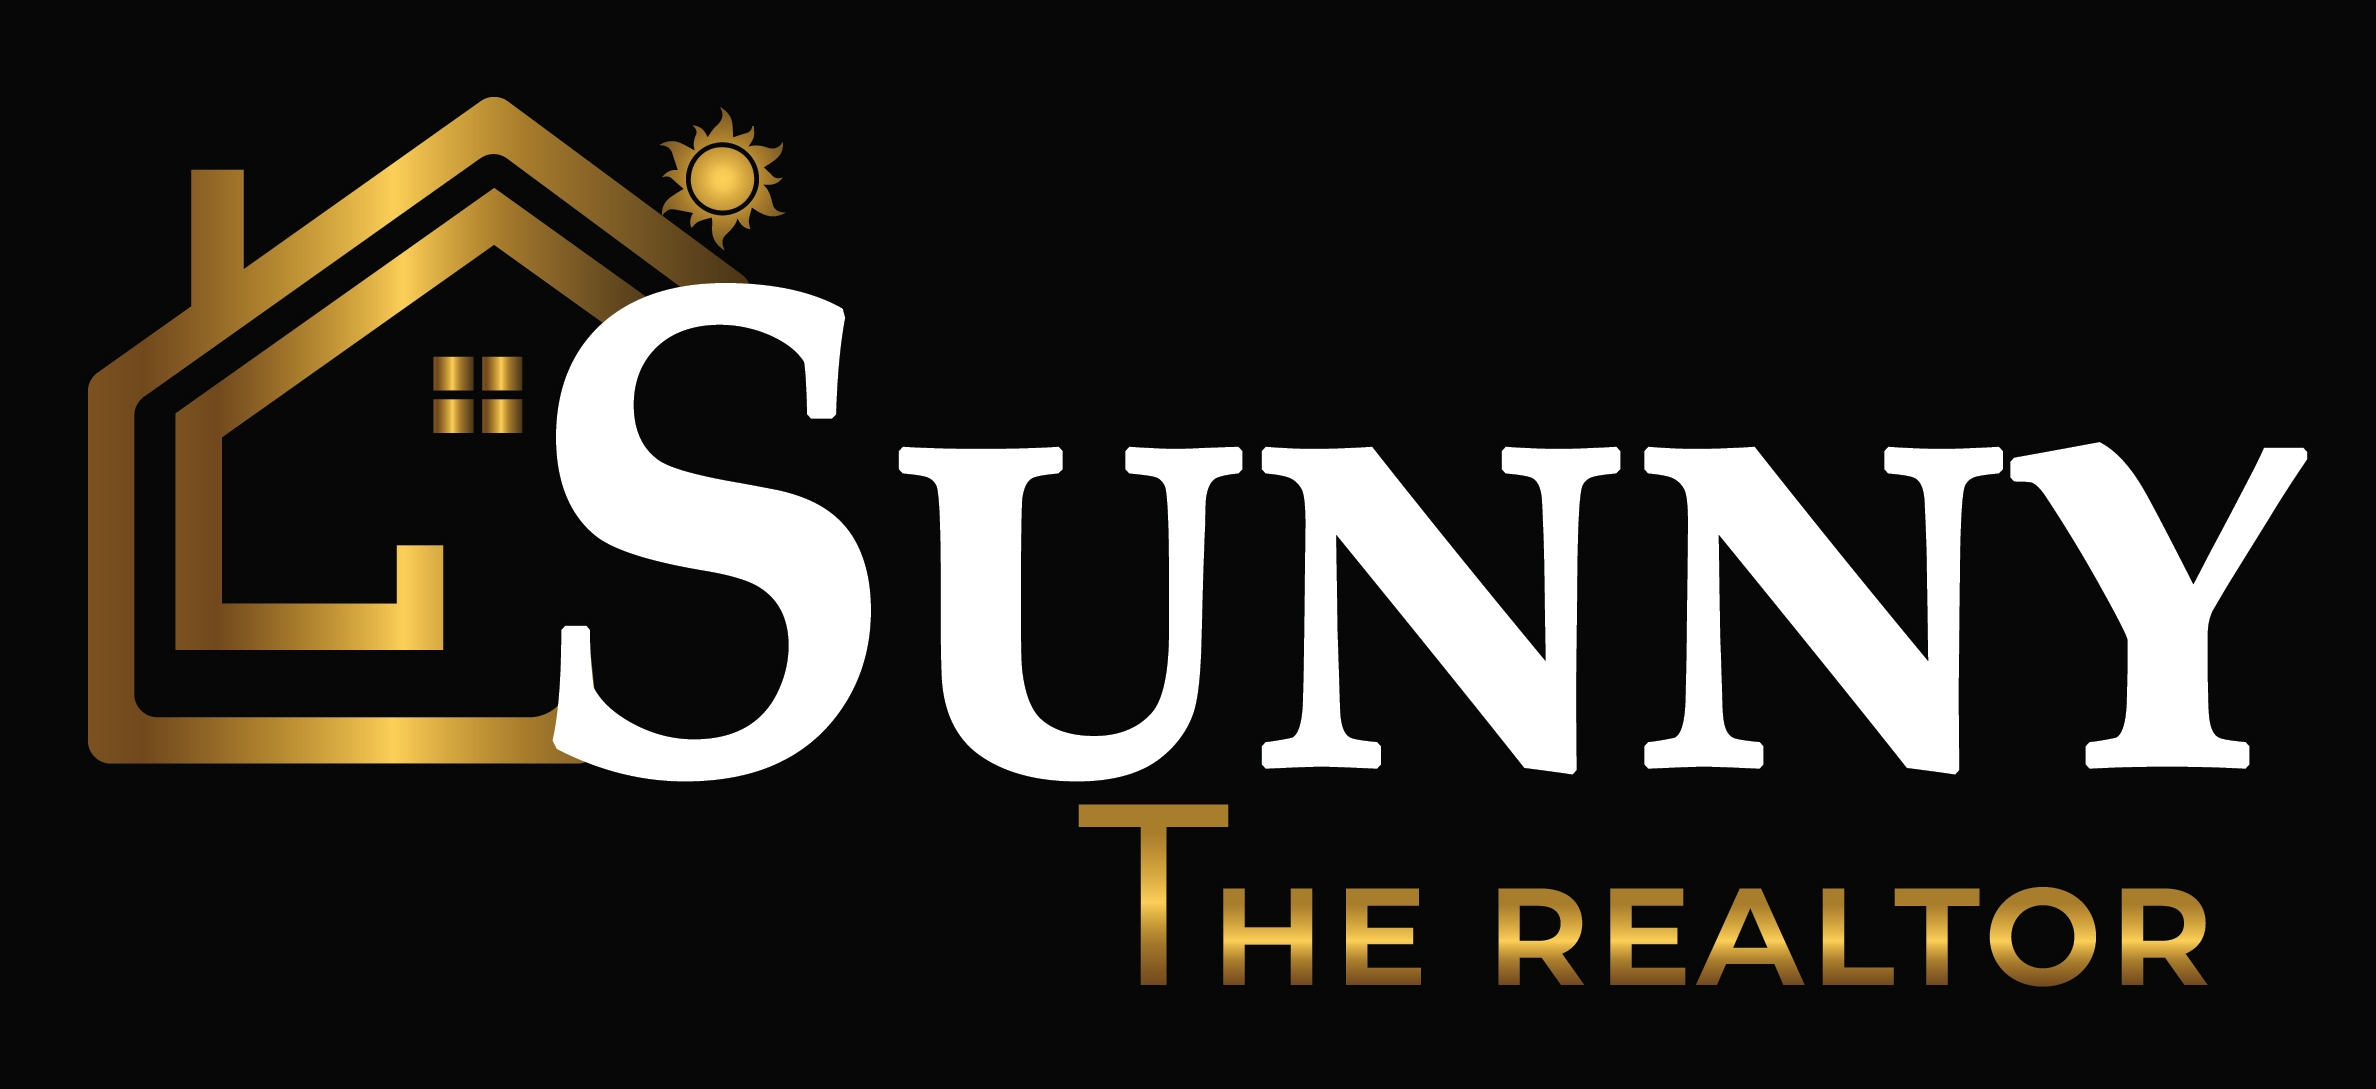 Sunny The Realtor | Selling Buying Renting Leasing in California | Realtor in California | DancingRealtor Dreamhomes Rancho Cucamonga homes Fontana homes Temecula Real Estate Temecula homes Riverside homes Orange County homes Irvine homes Corona Del Mar Real Estate ExpRealty eXp commercial Exp agent